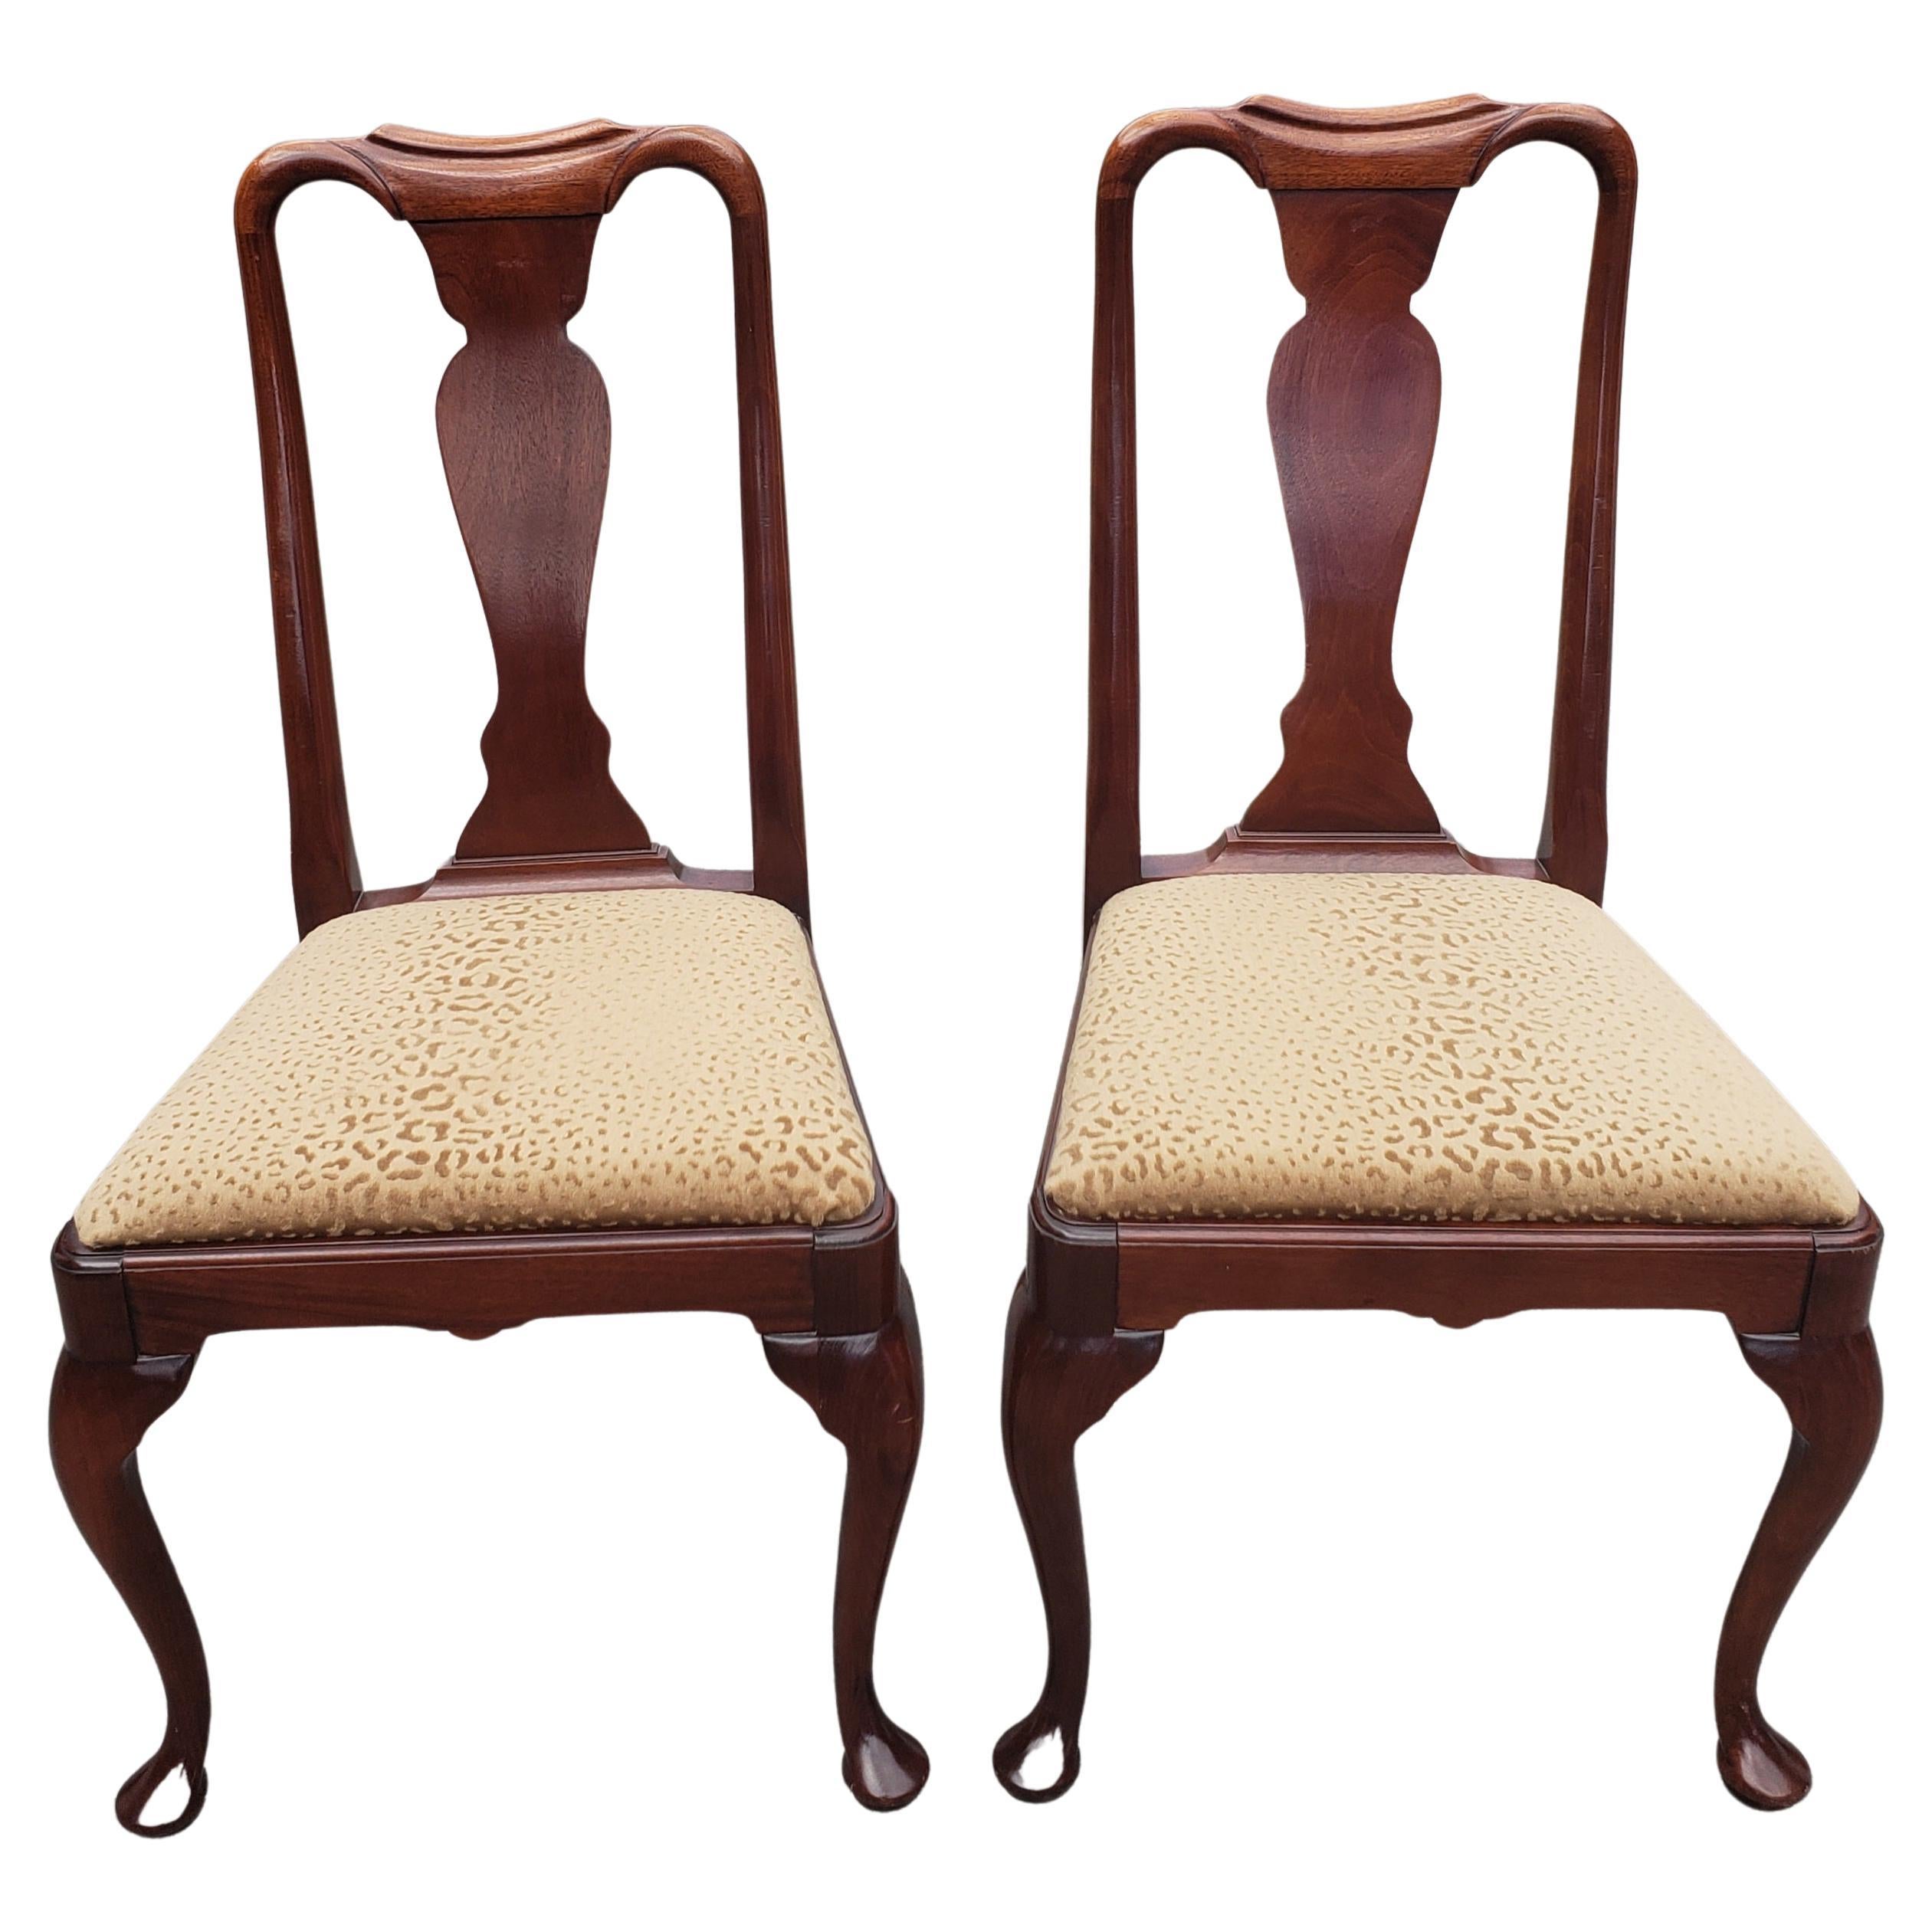 Upholstery Hickory Chair Queen Anne Mahogany Dinning Chairs, A Set